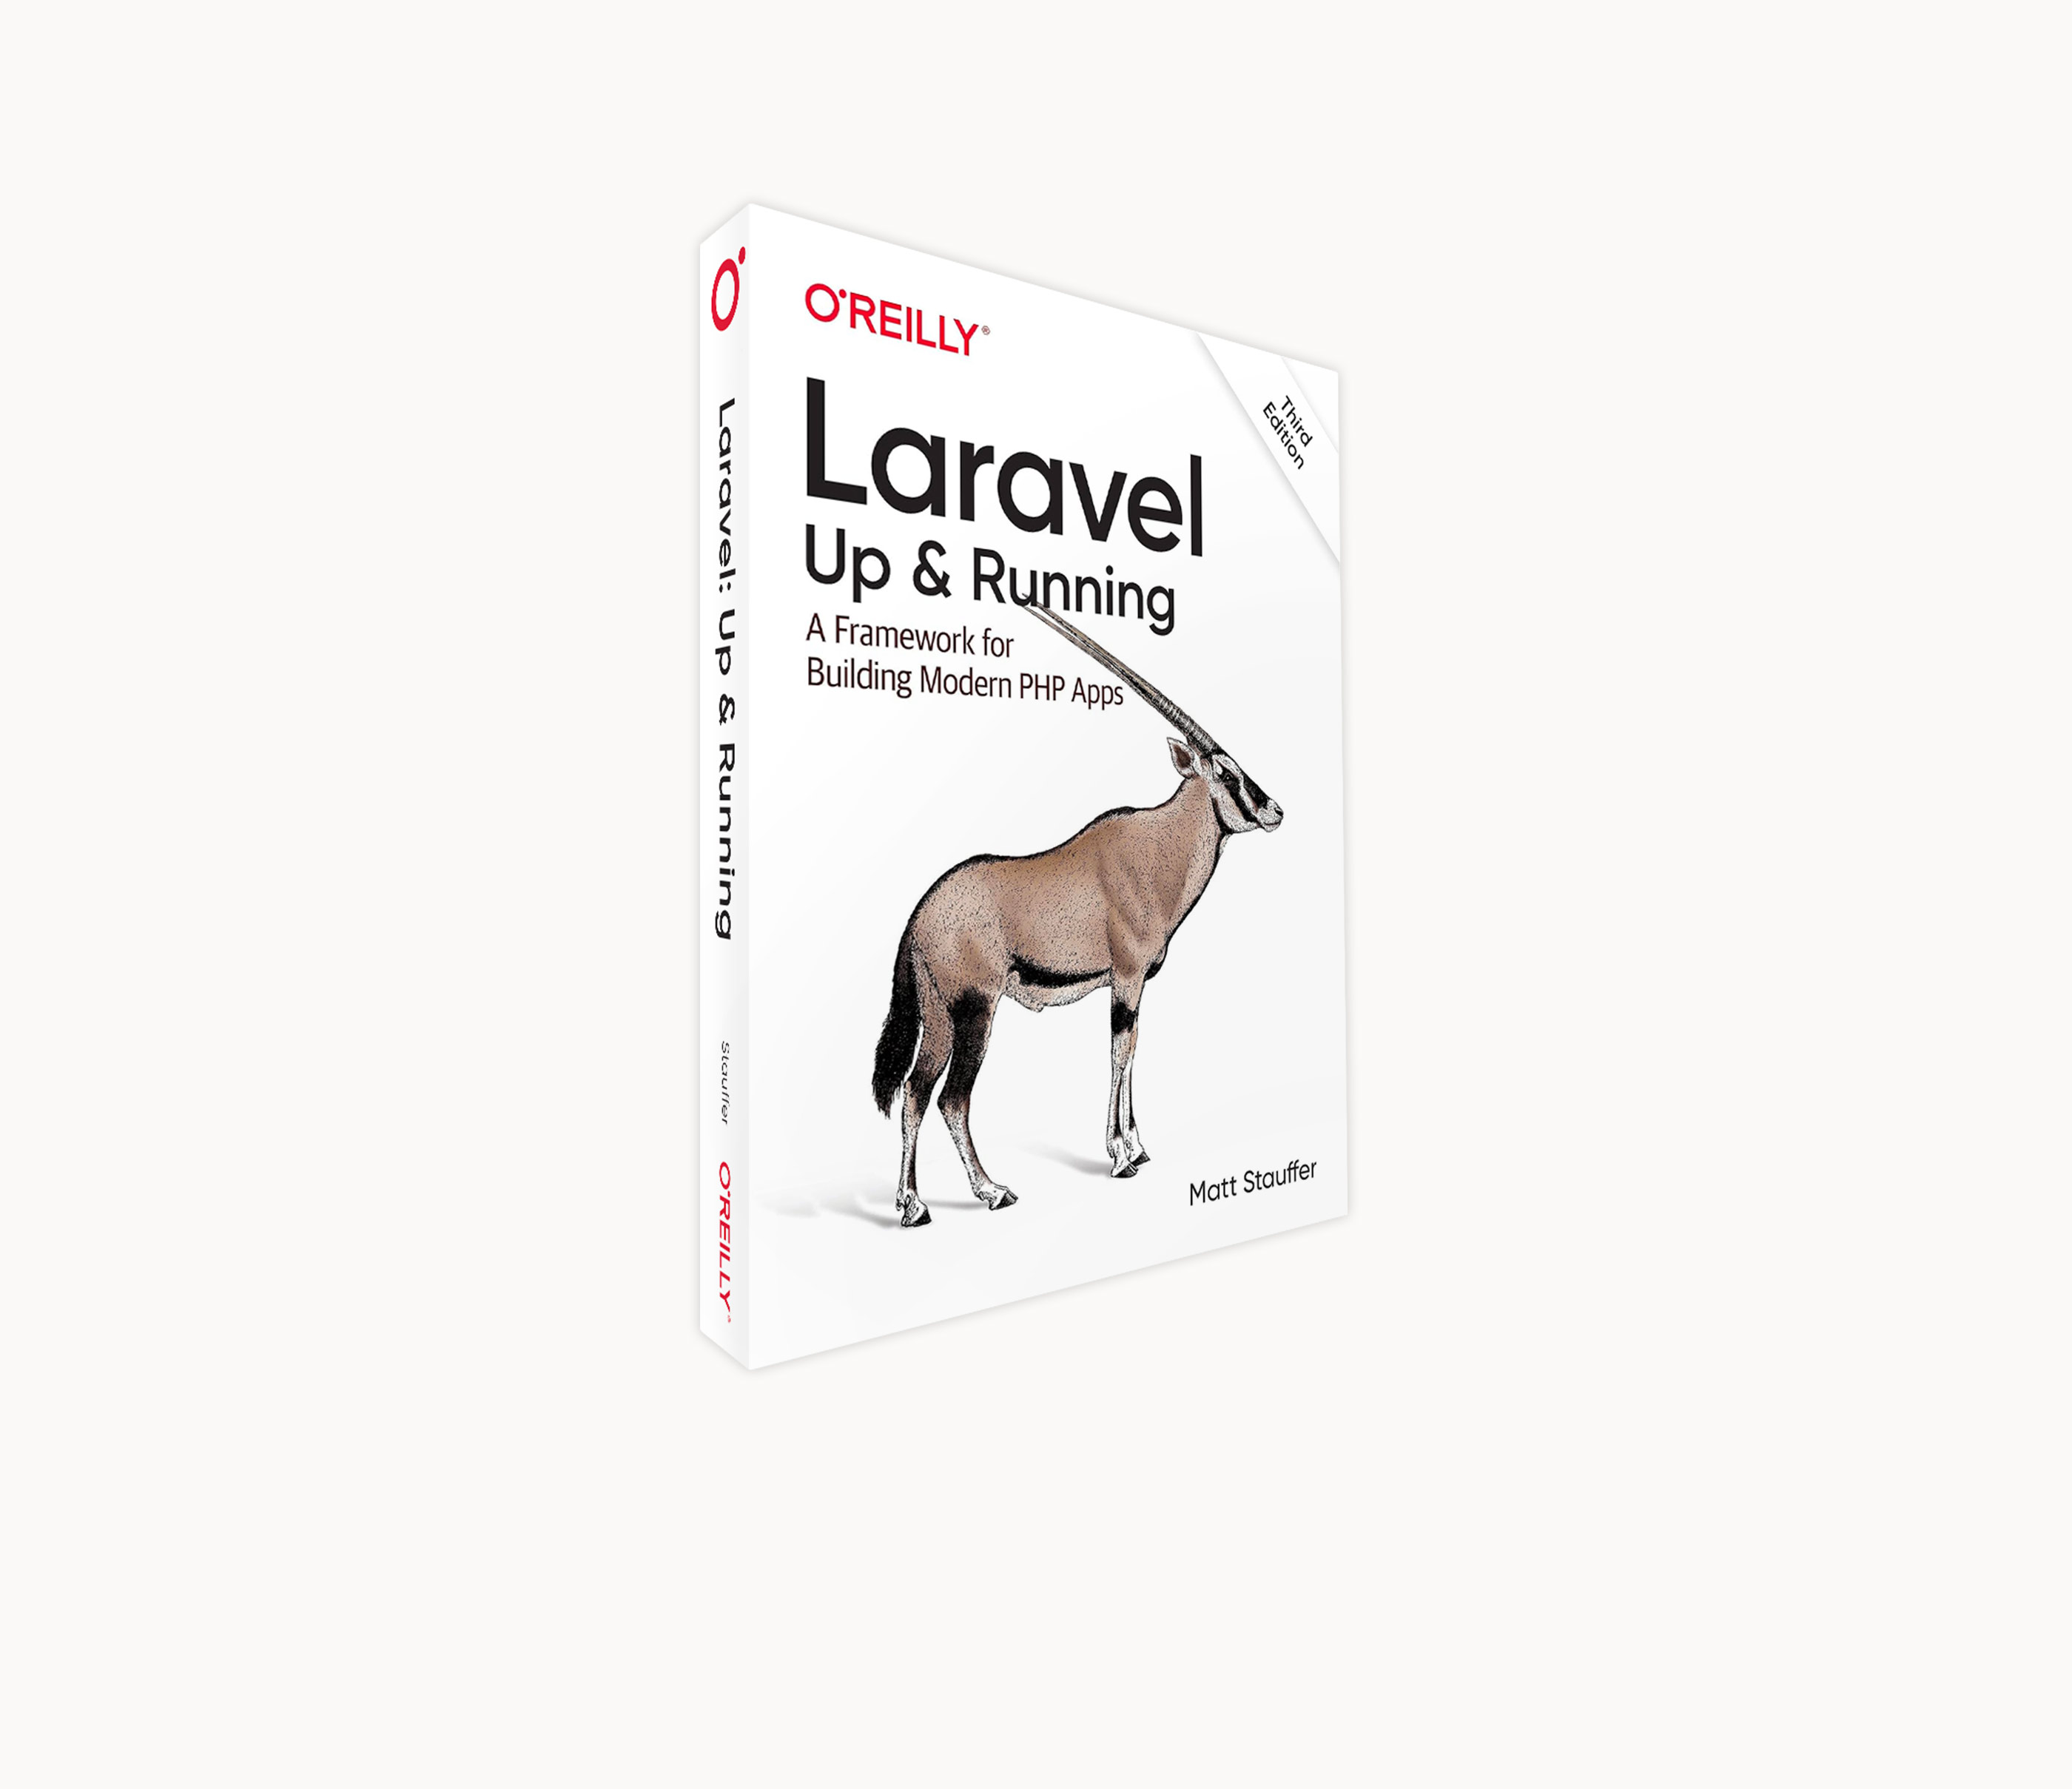 A picture of the Laravel: Up & Running book